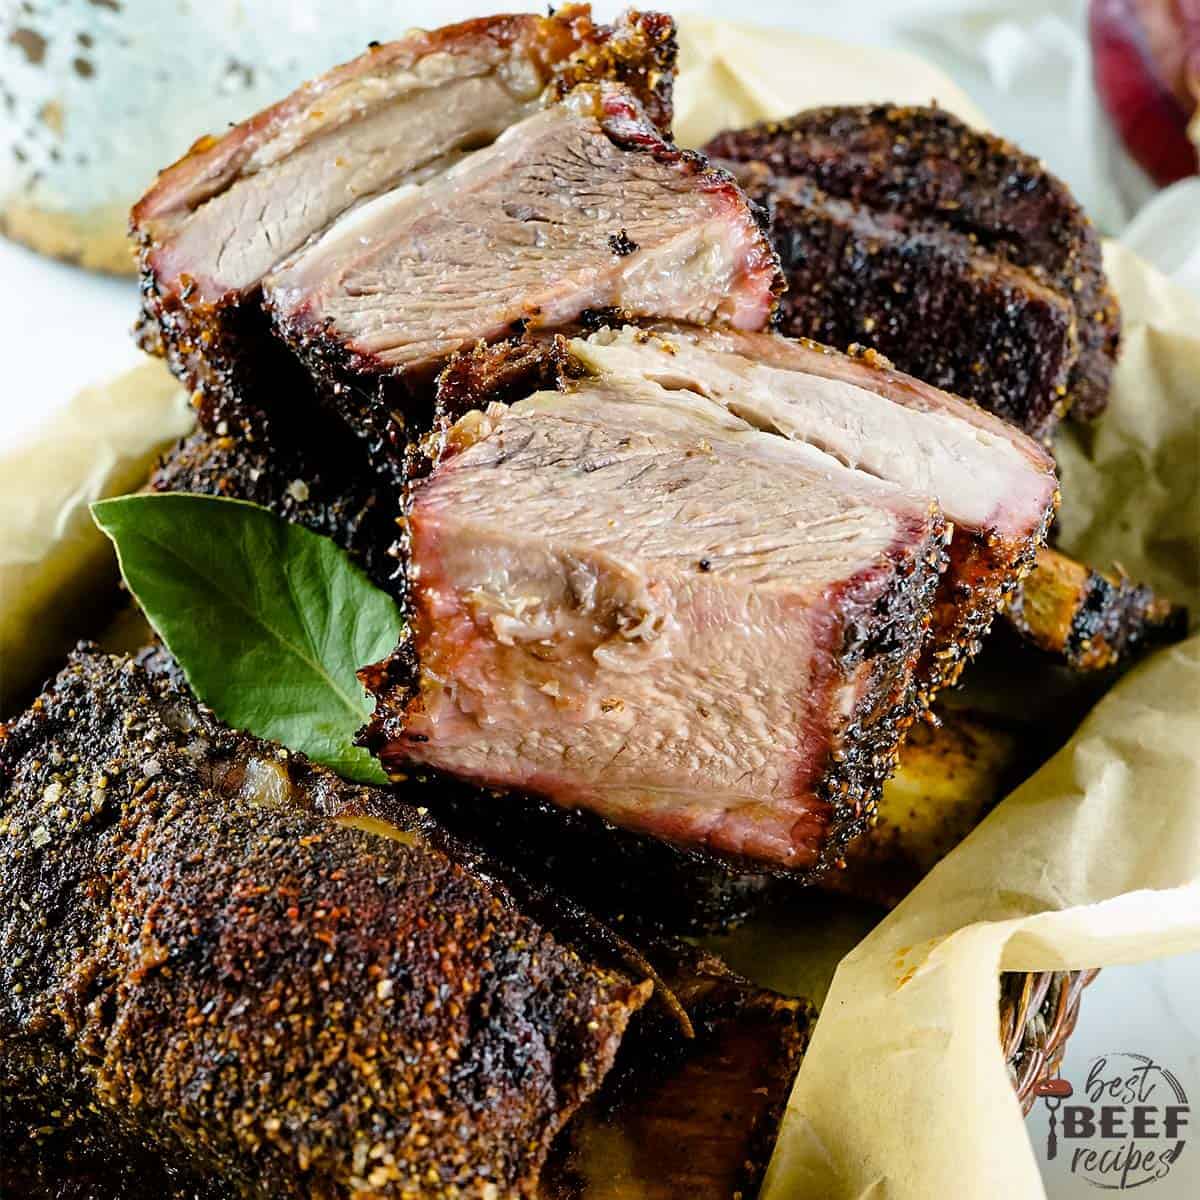 Smoked beef short ribs sliced on parchment paper in a basket